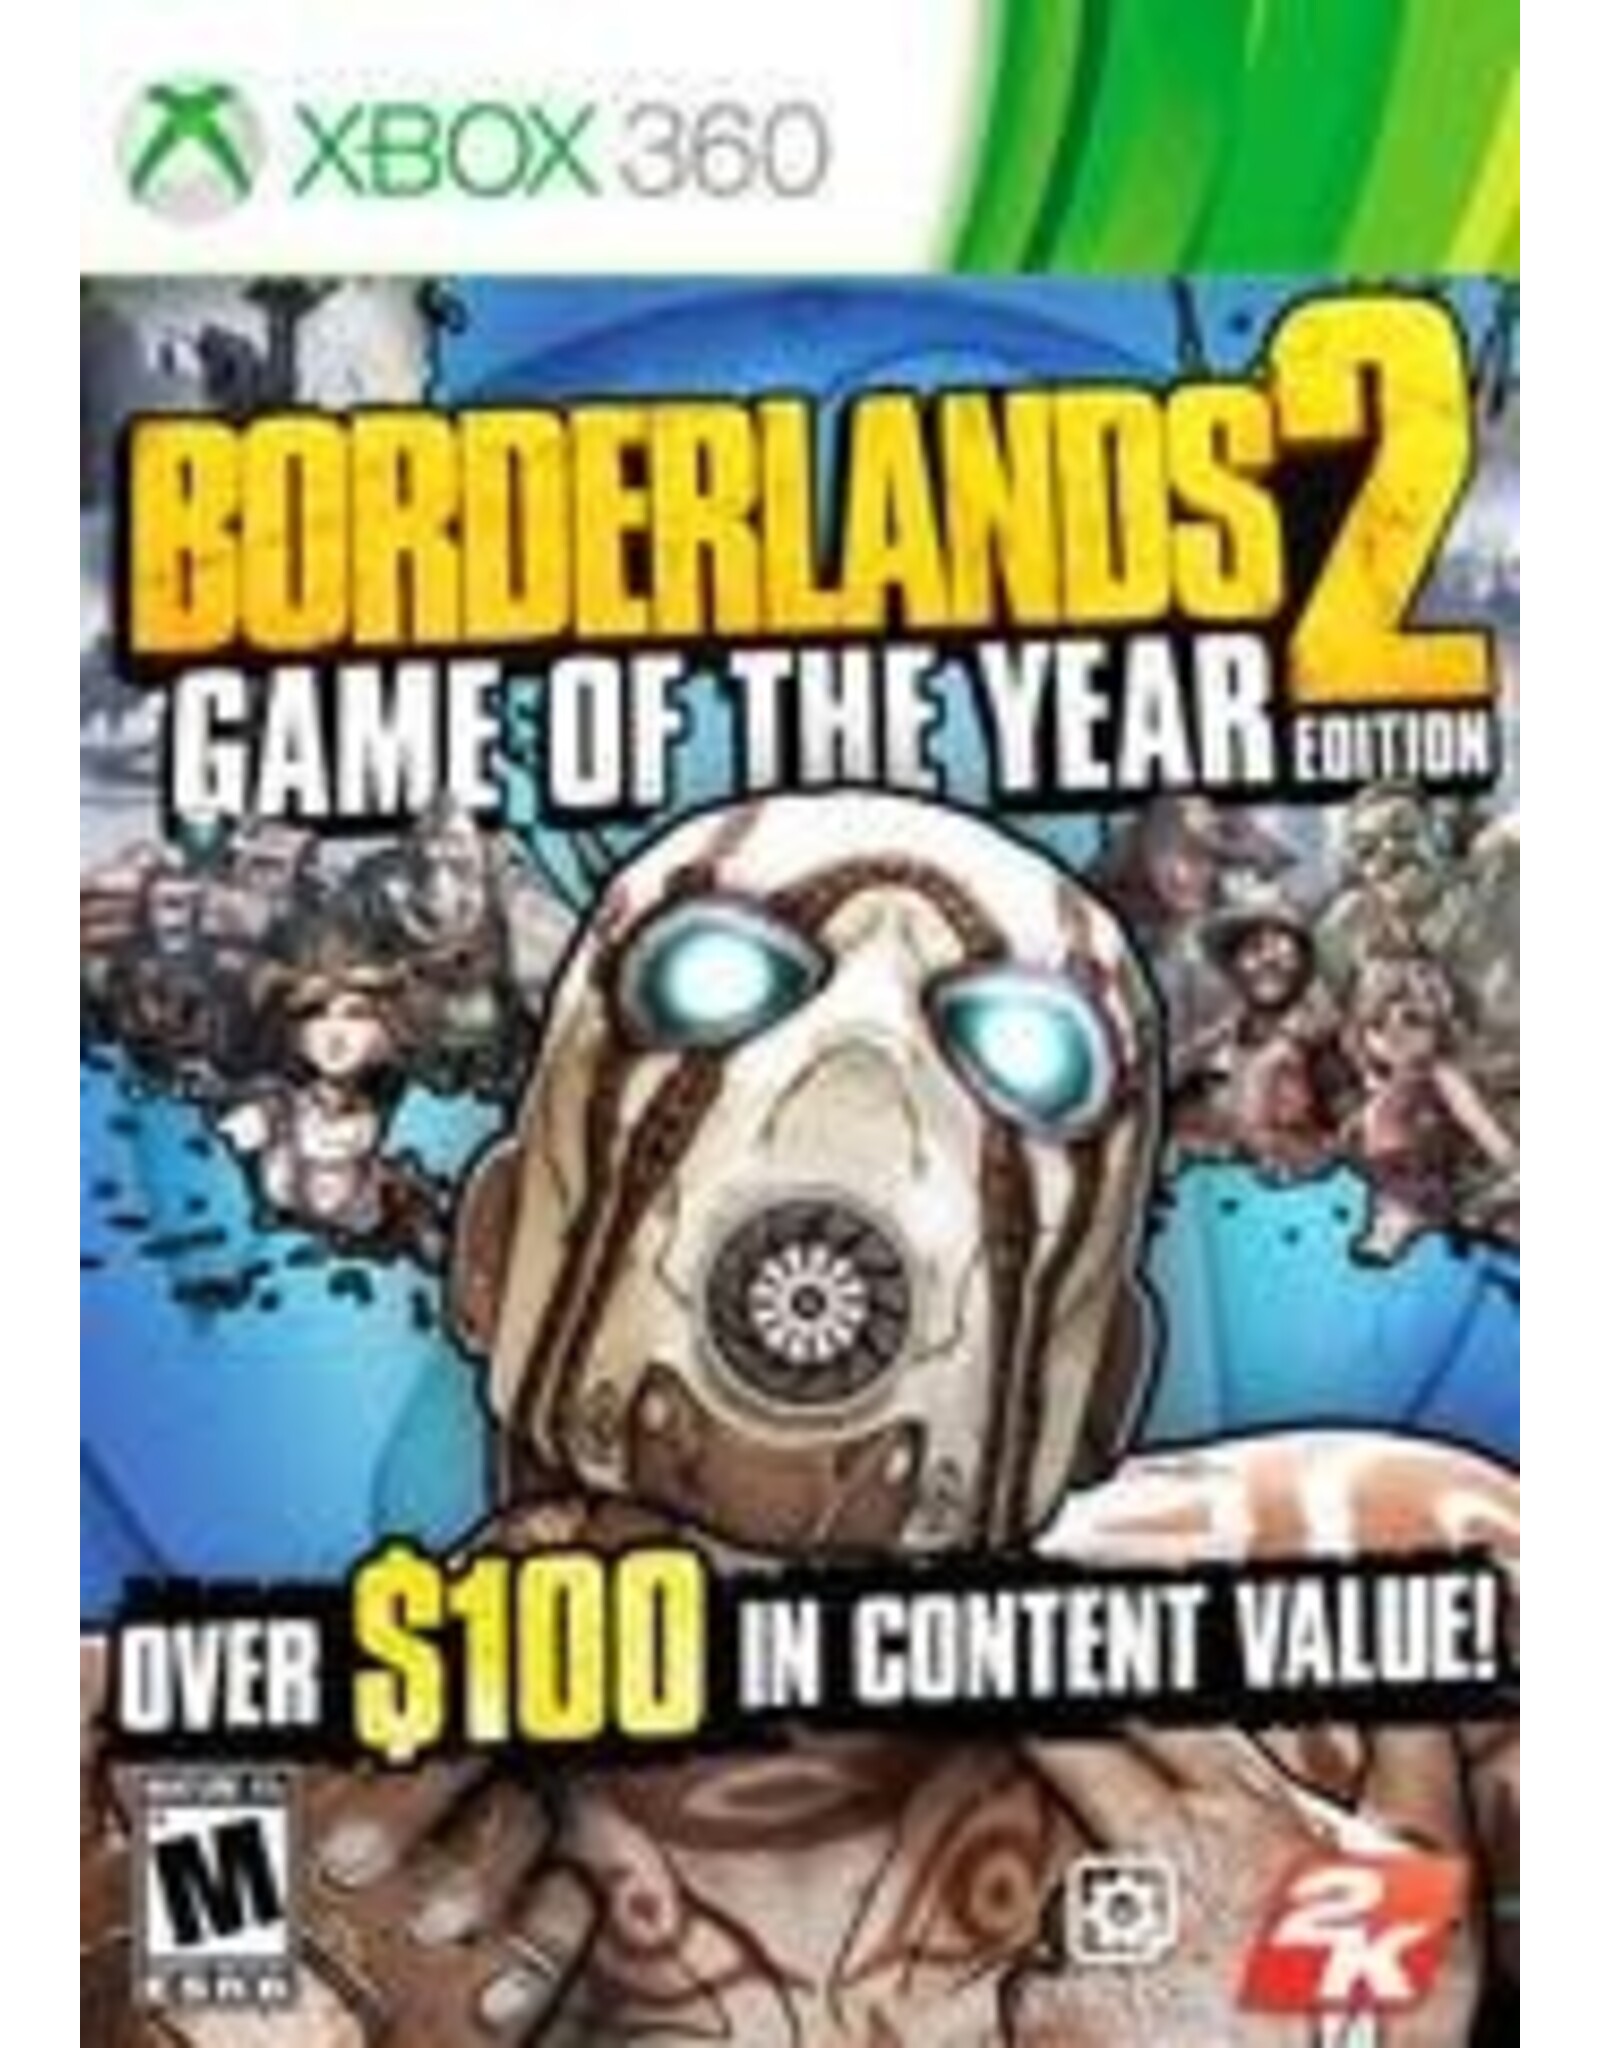 Xbox 360 Borderlands 2 Game of the Year Edition (CiB)